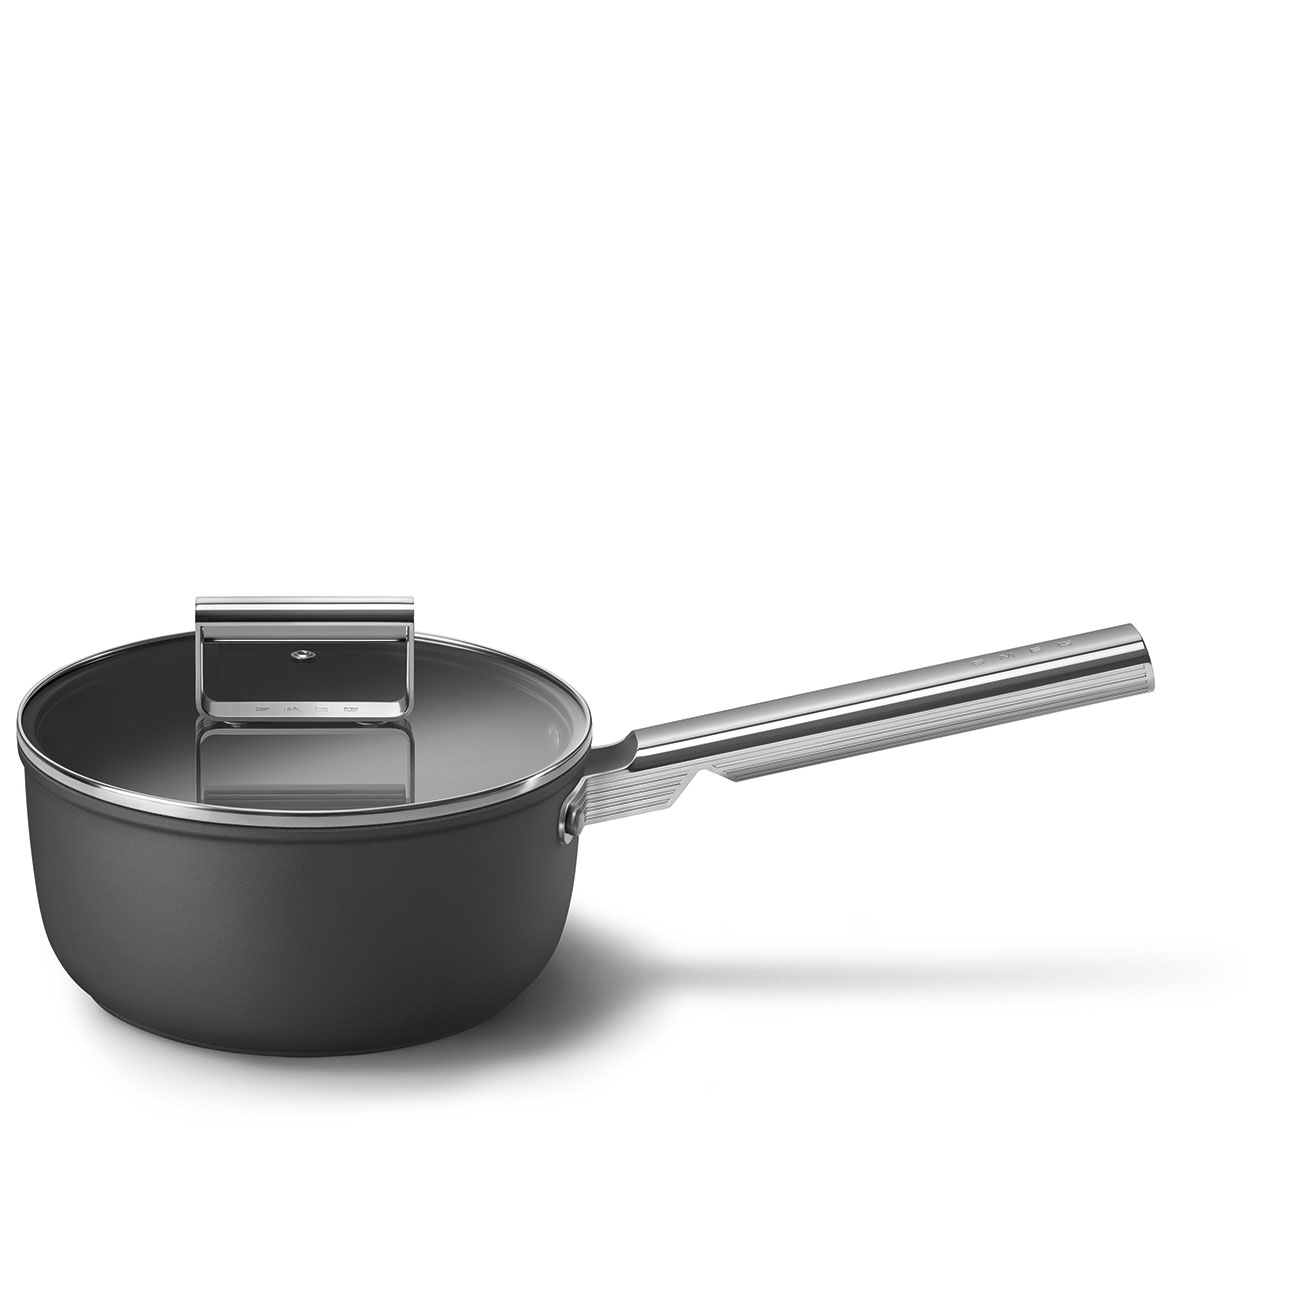 Smeg Black Non-stick Saucepan with glass lid and stainless steel handle_10